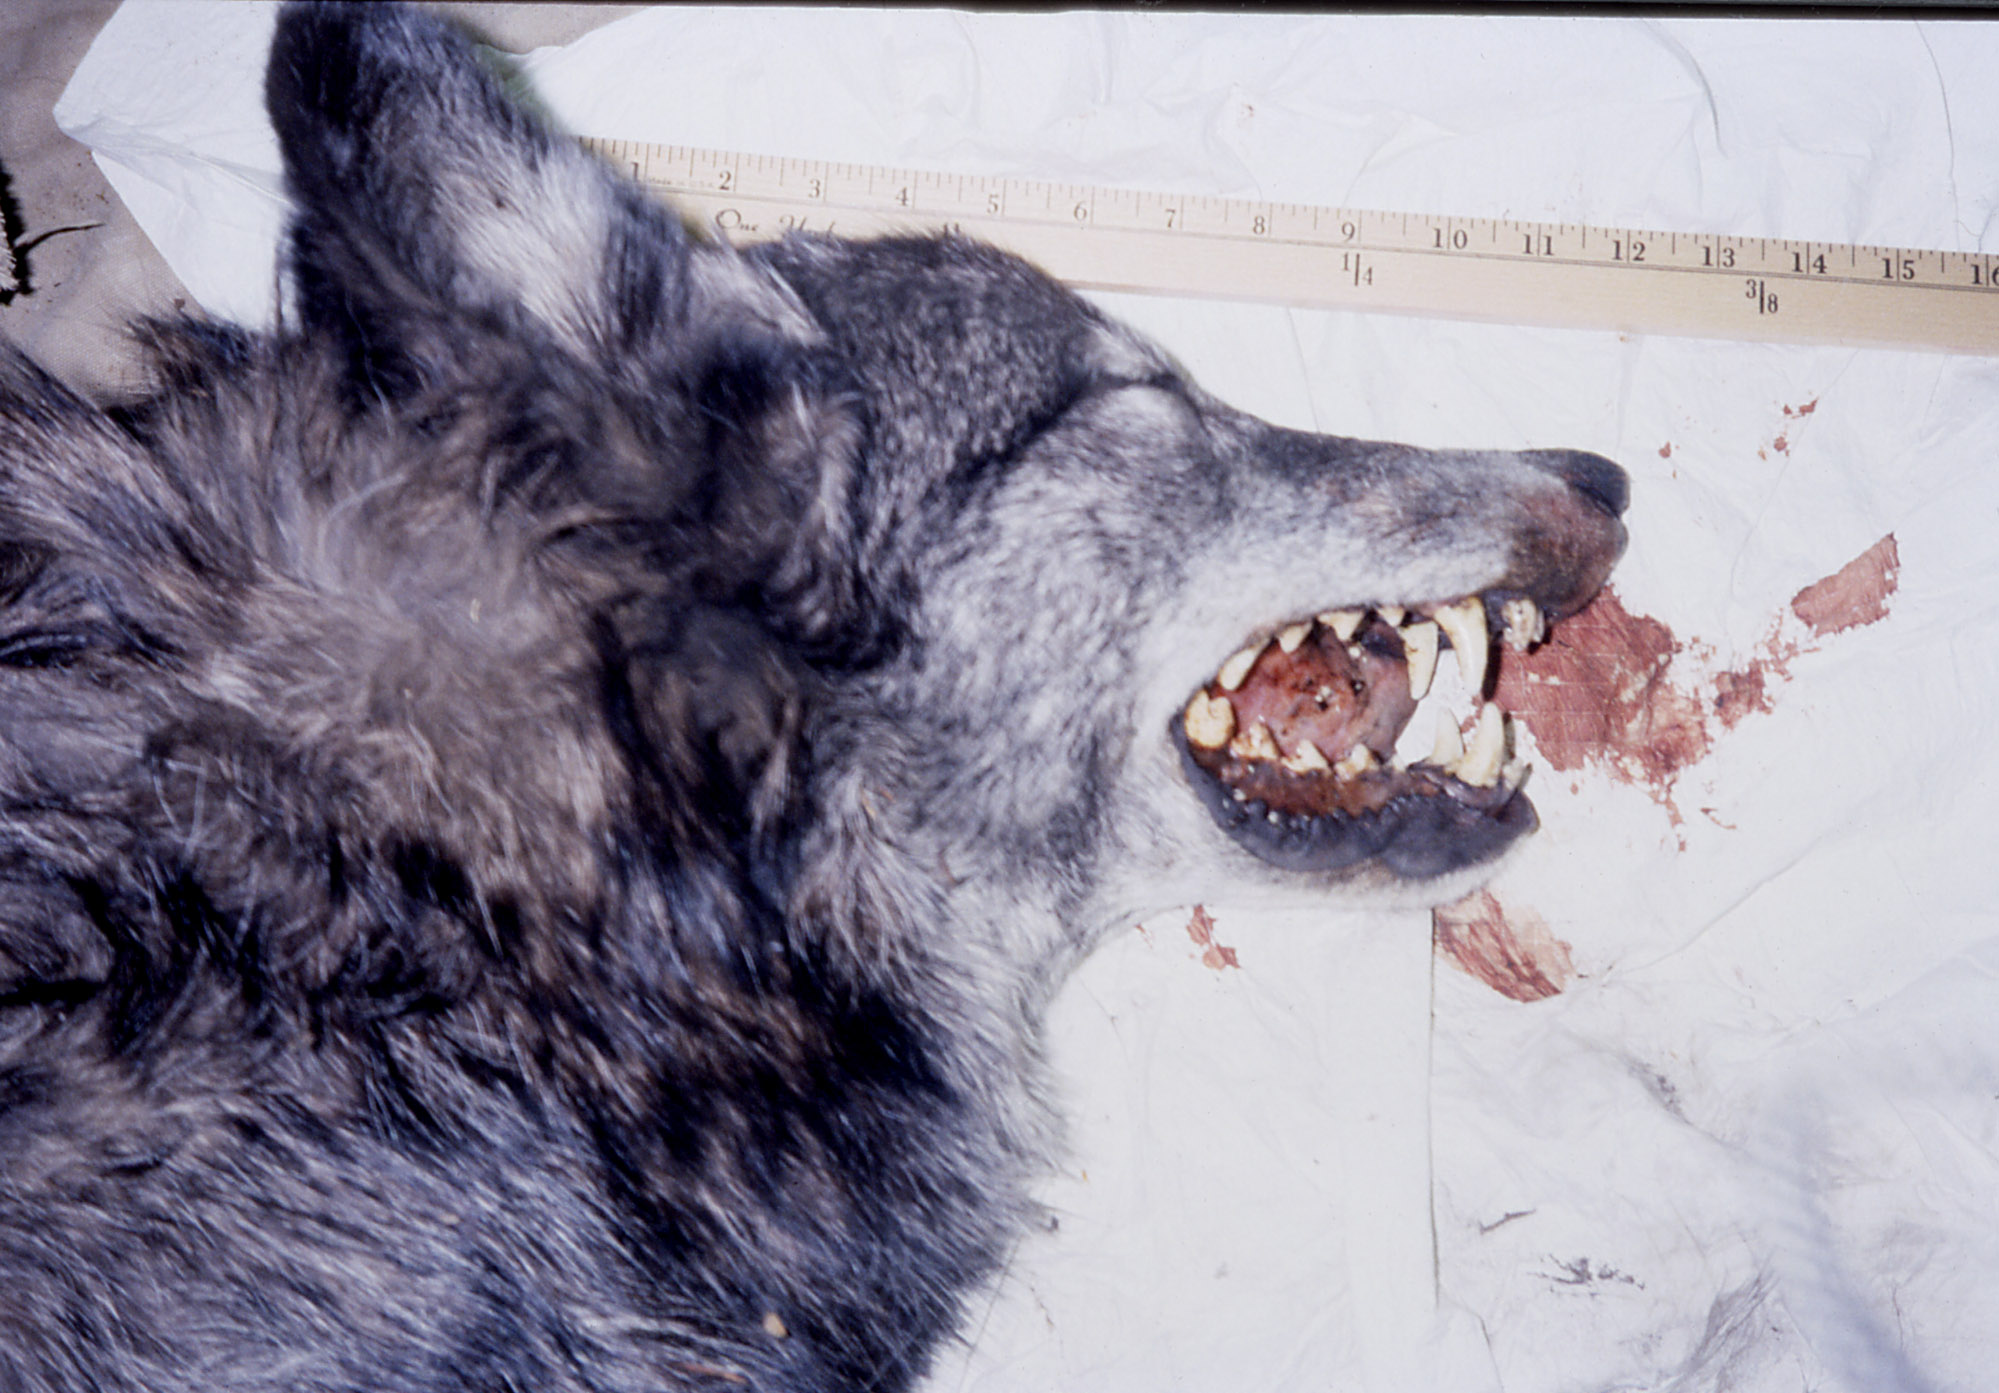 http://www.nps.gov/features/yell/slidefile/mammals/wolf/Images/14620.jpg